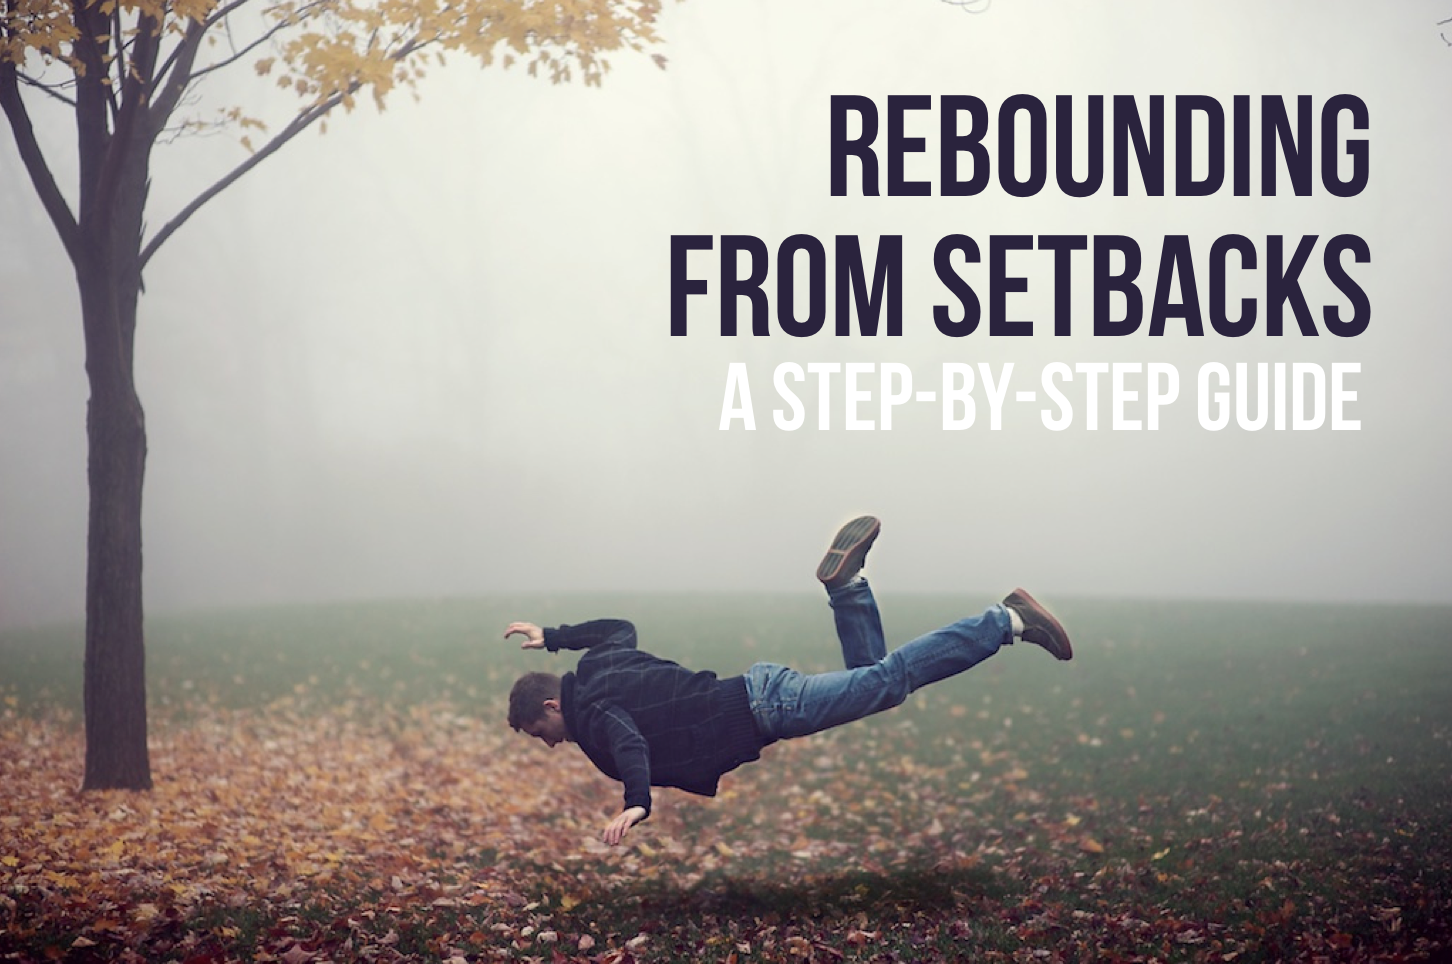 Rebounding-from-Setbacks-a-step-by-step-guide.png